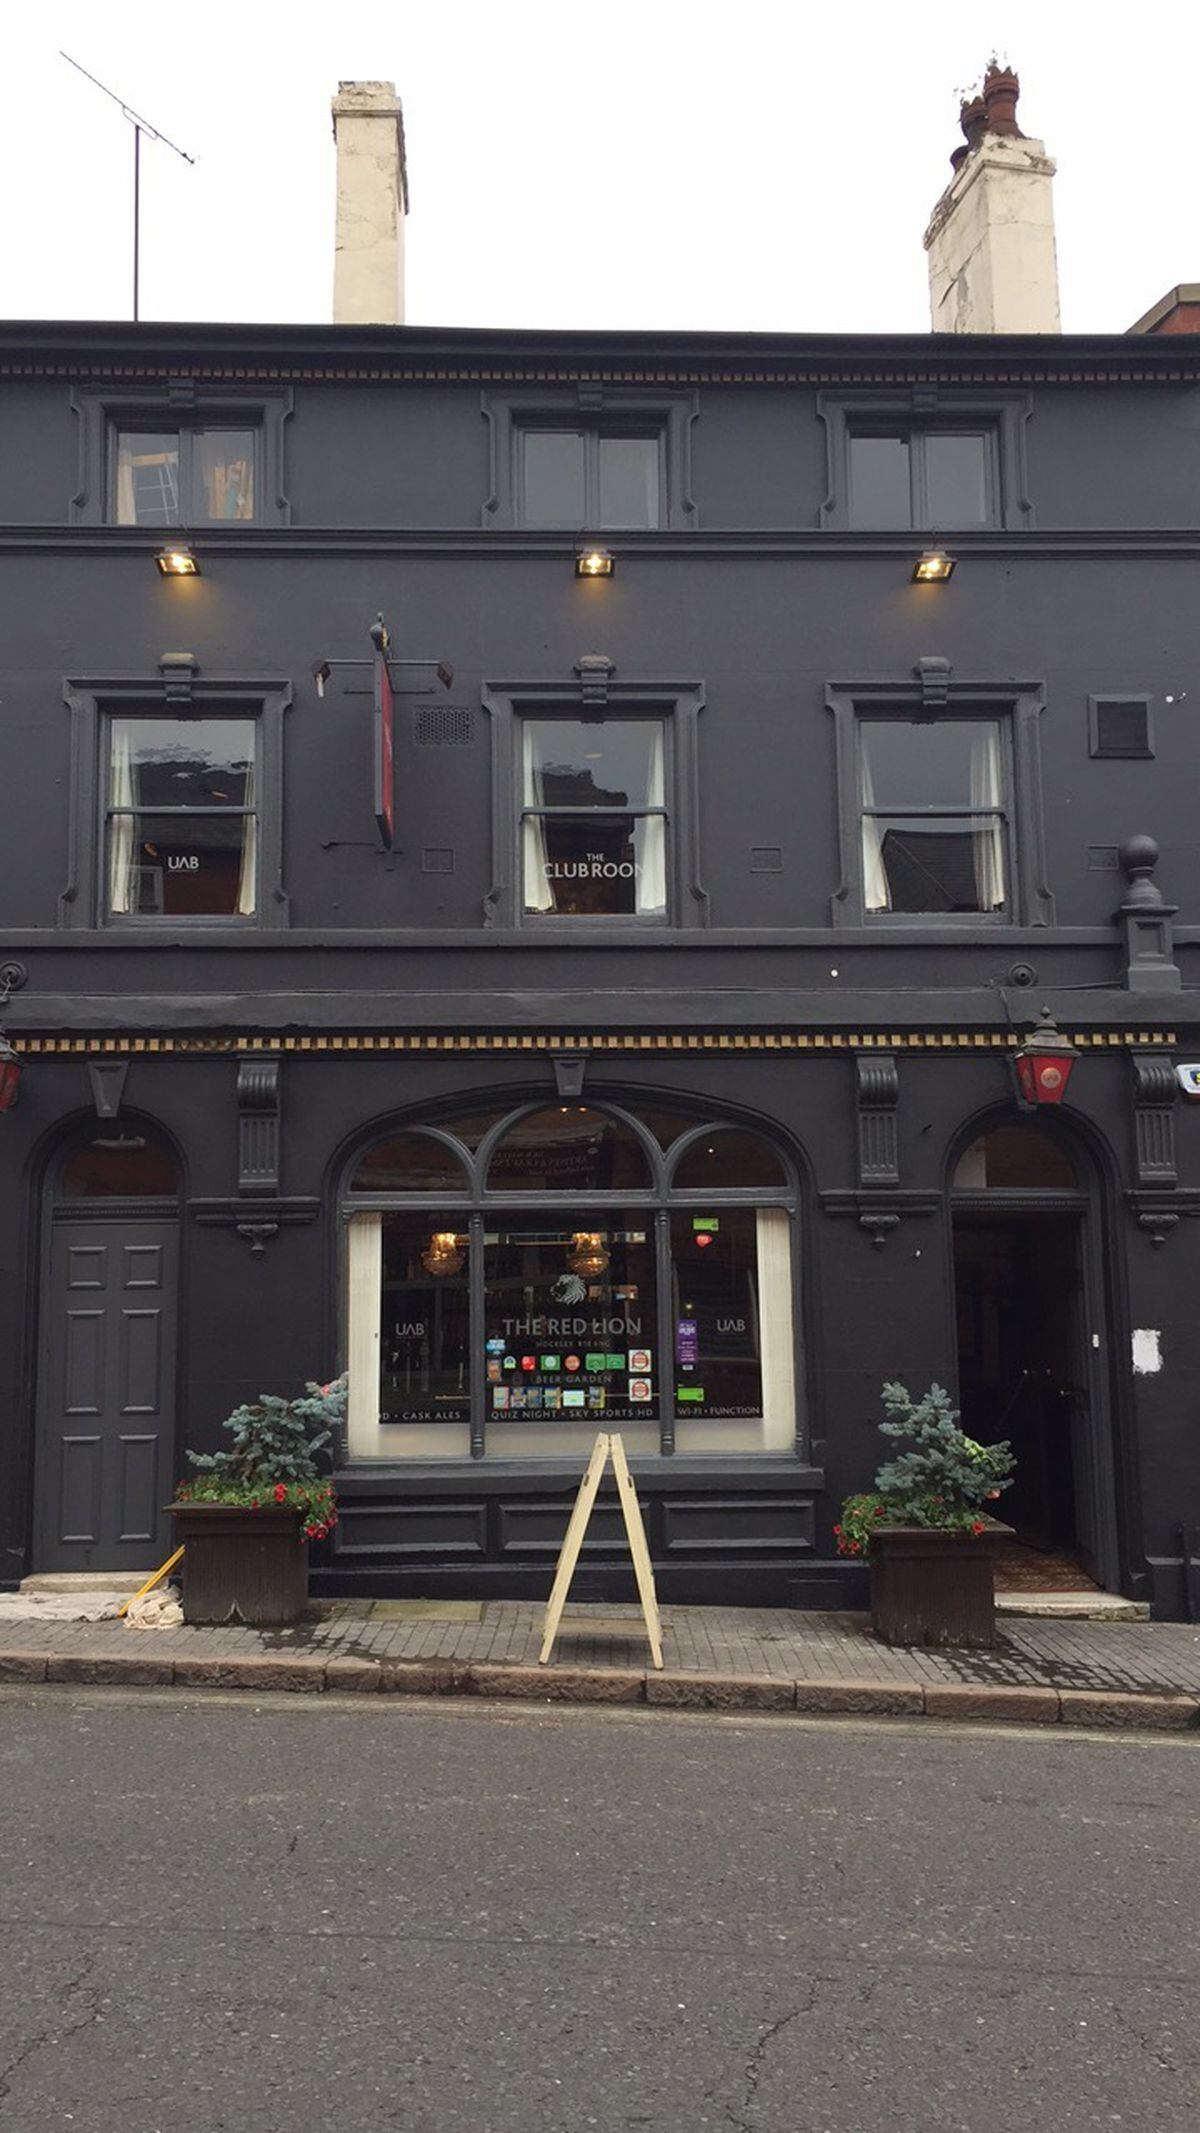 Good looks – The Red Lion’s smart exterior